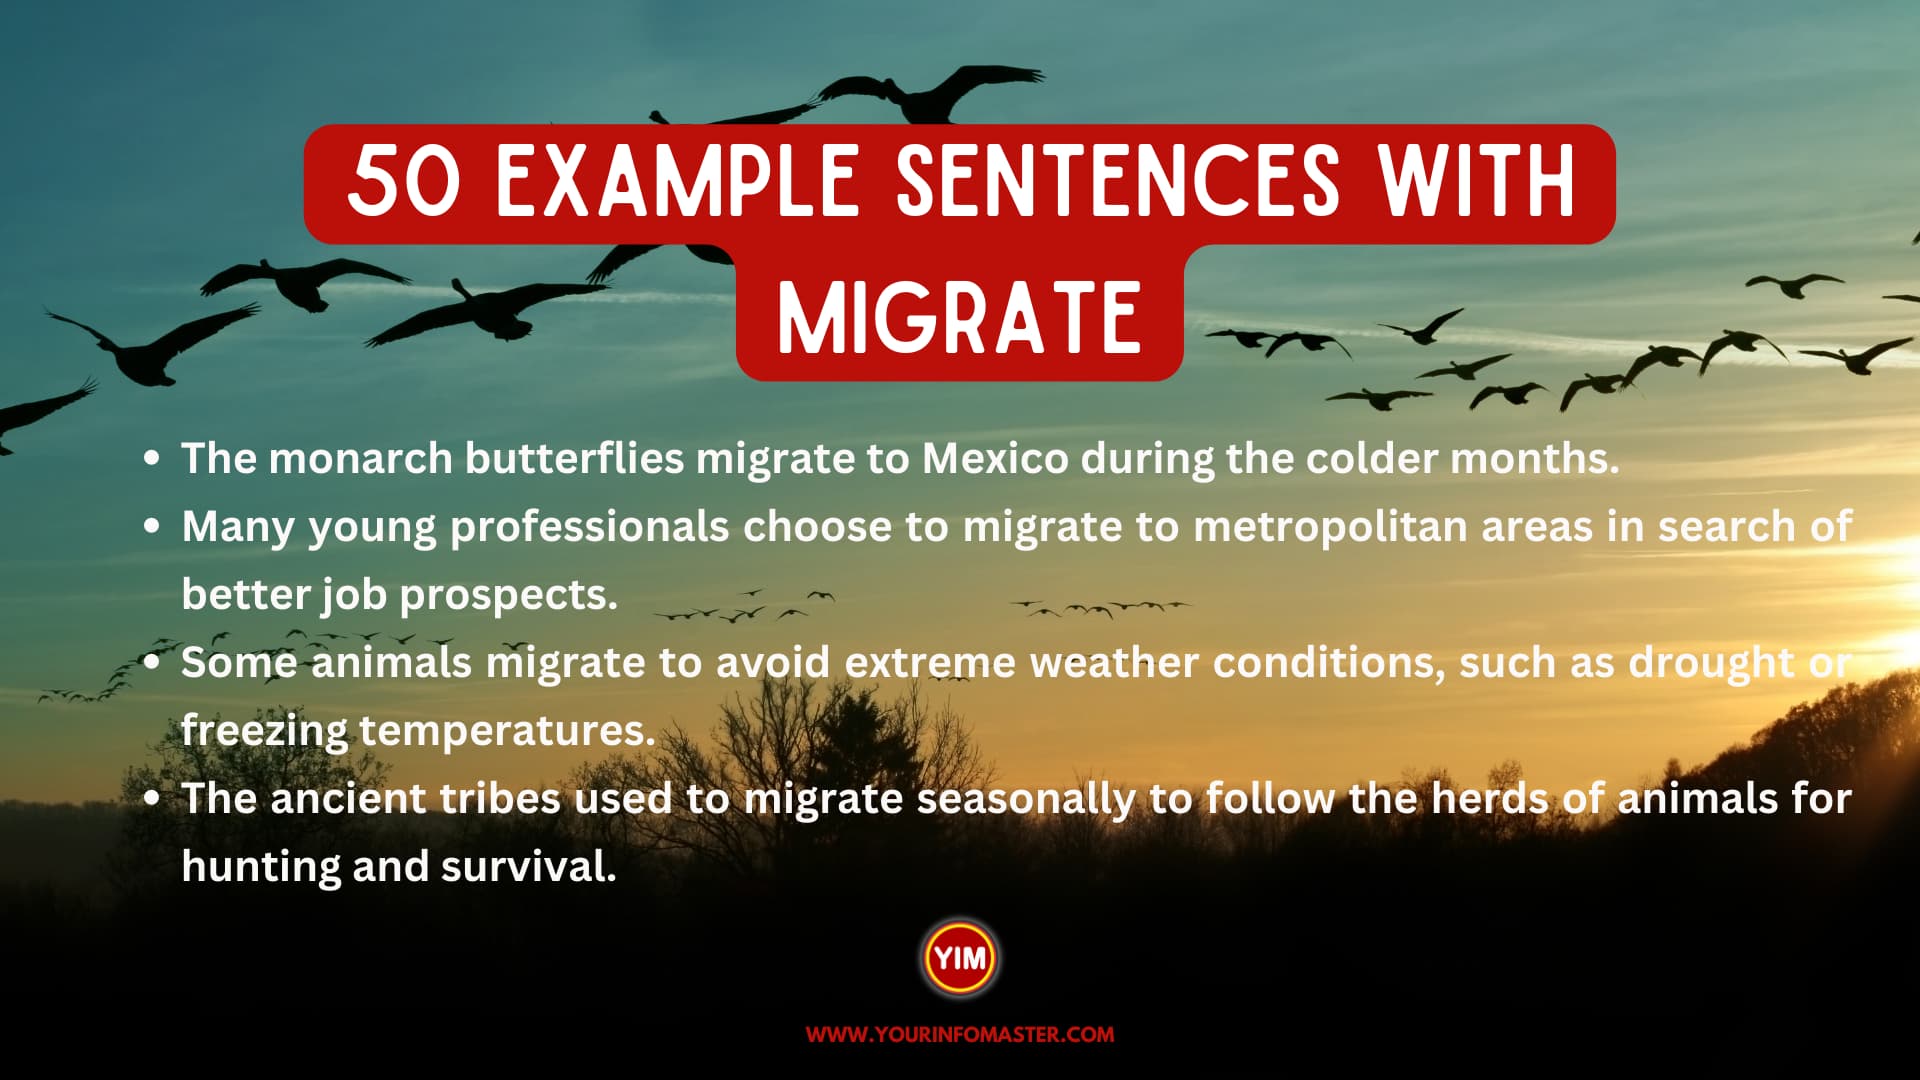 50 Sentences with Migrate